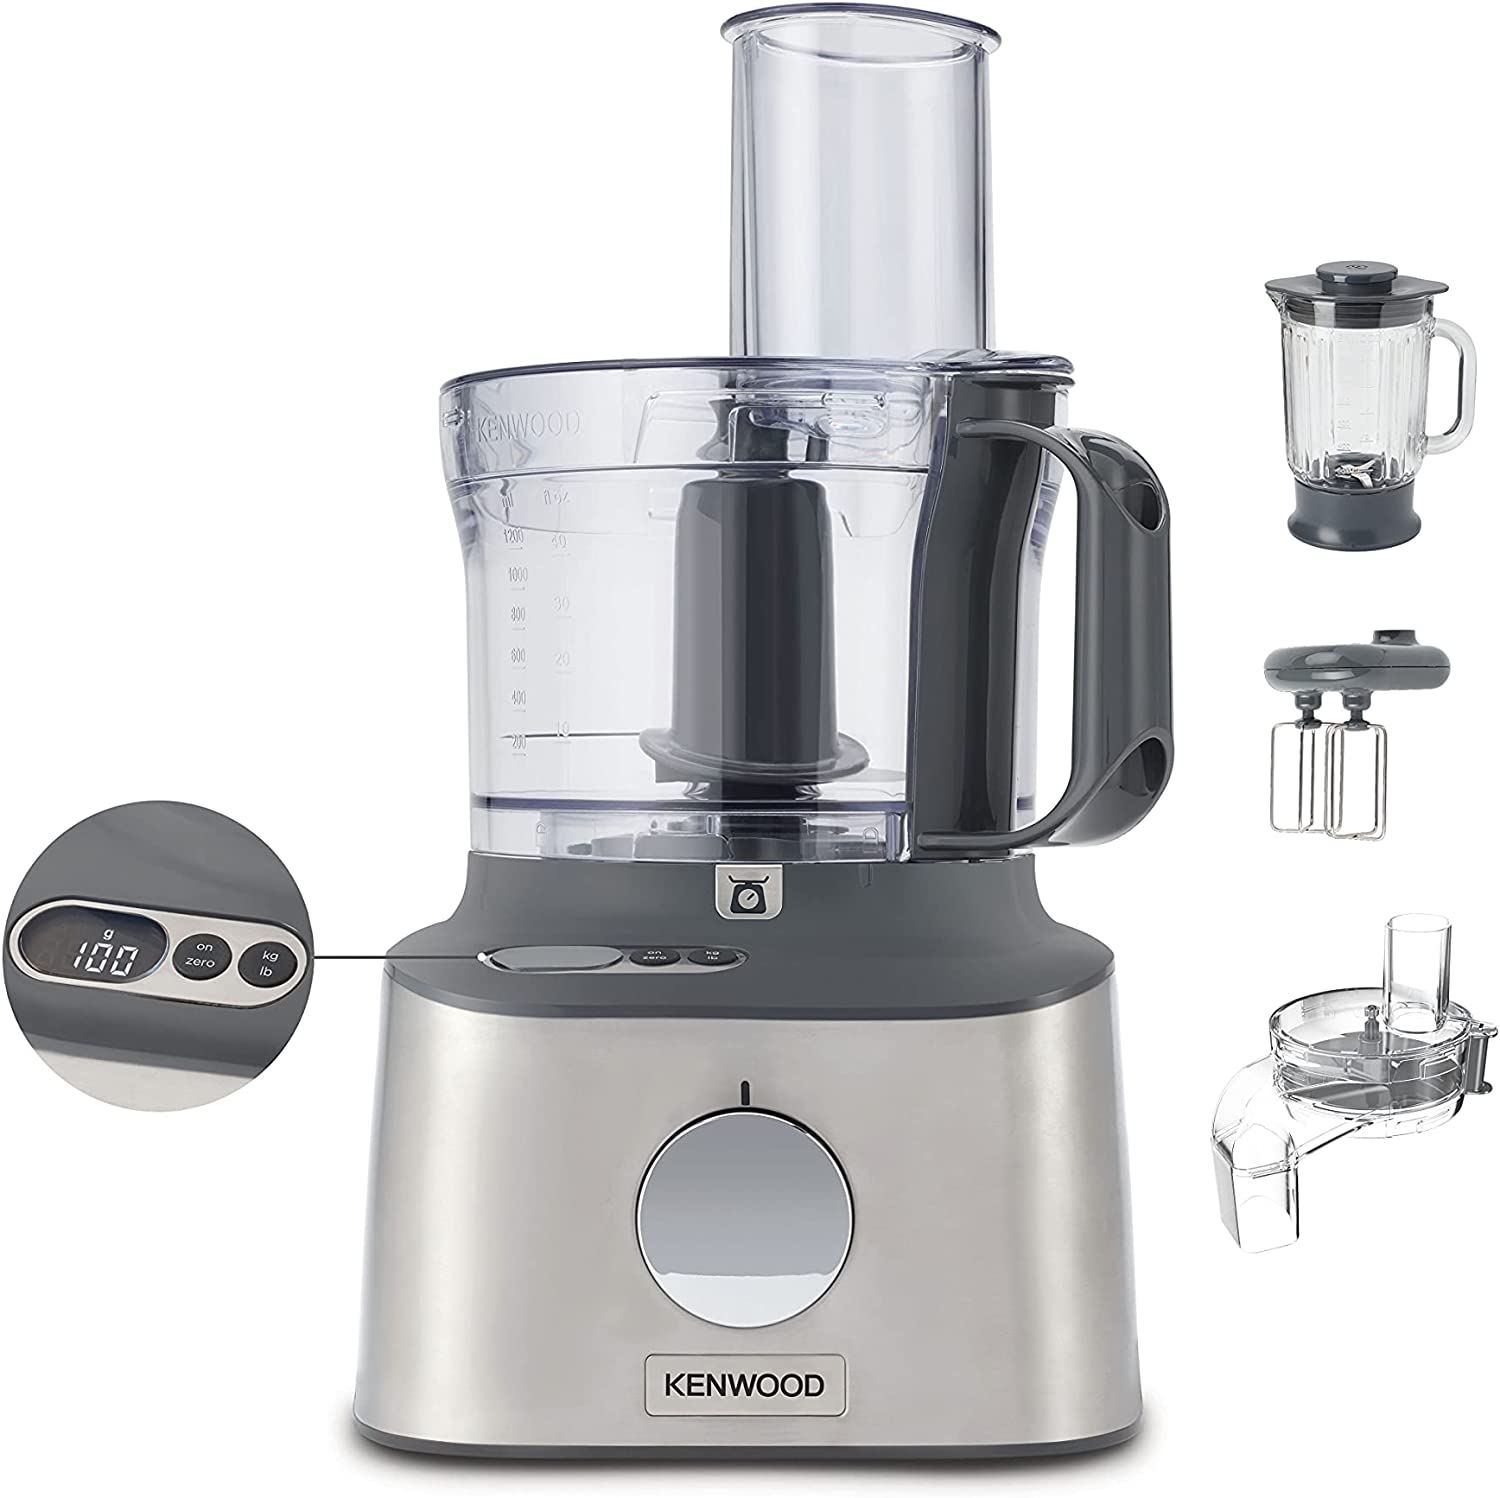 Kenwood Multipro Compact FDM315SS Compact Food Processor, Integrated Scale, Exclusive to Amazon, Kitchen Appliance with 2.1 L Work Container, Glass Mixing Attachment, Cube Cutter, Metal Housing, 800 W, Silver